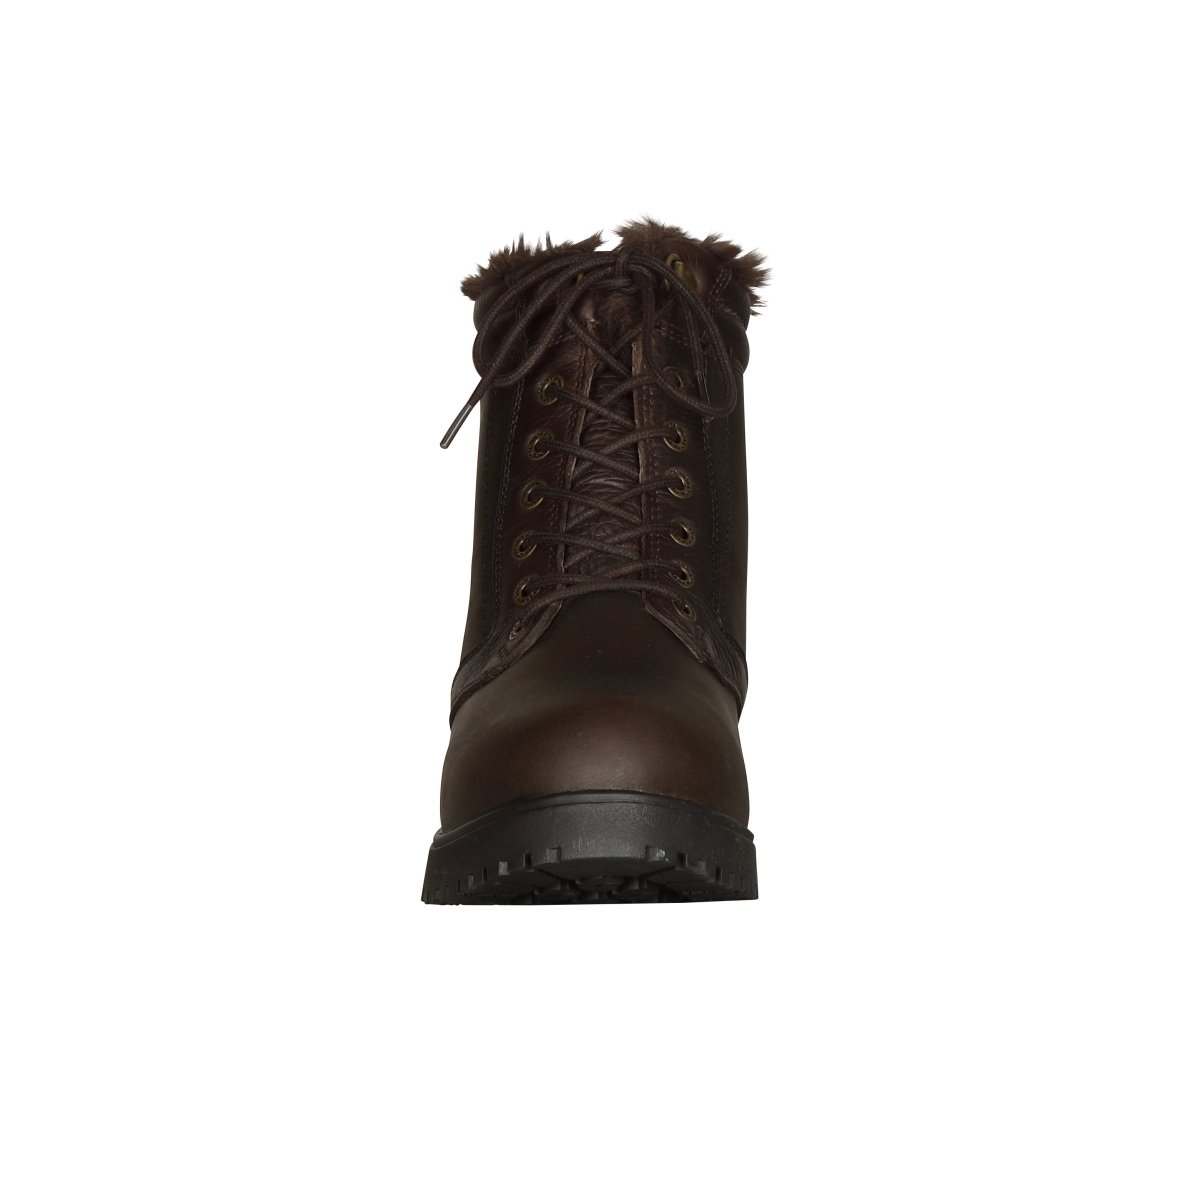 Moretta Varese Lace Country Boots - Brown - 4/37